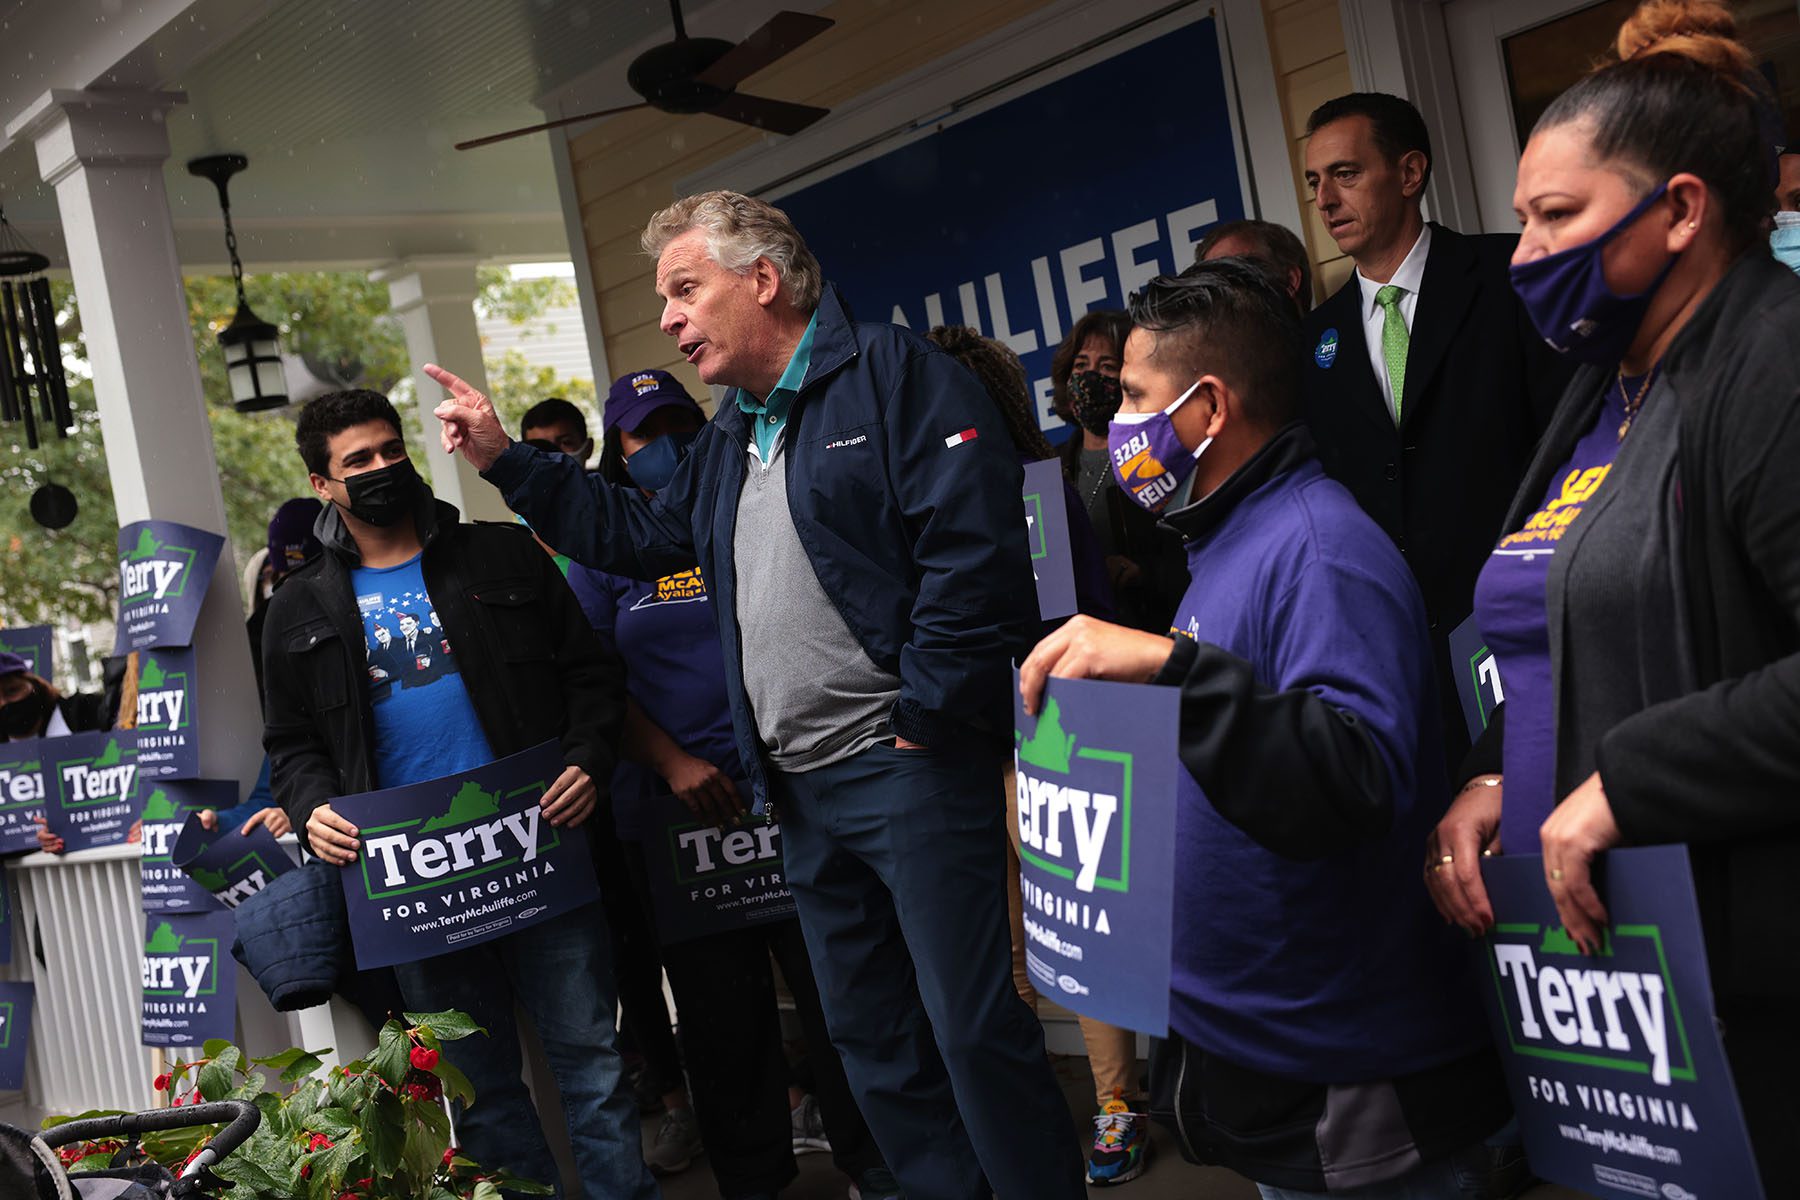 Terry McAuliffe speaks to supporters during a campaign event.